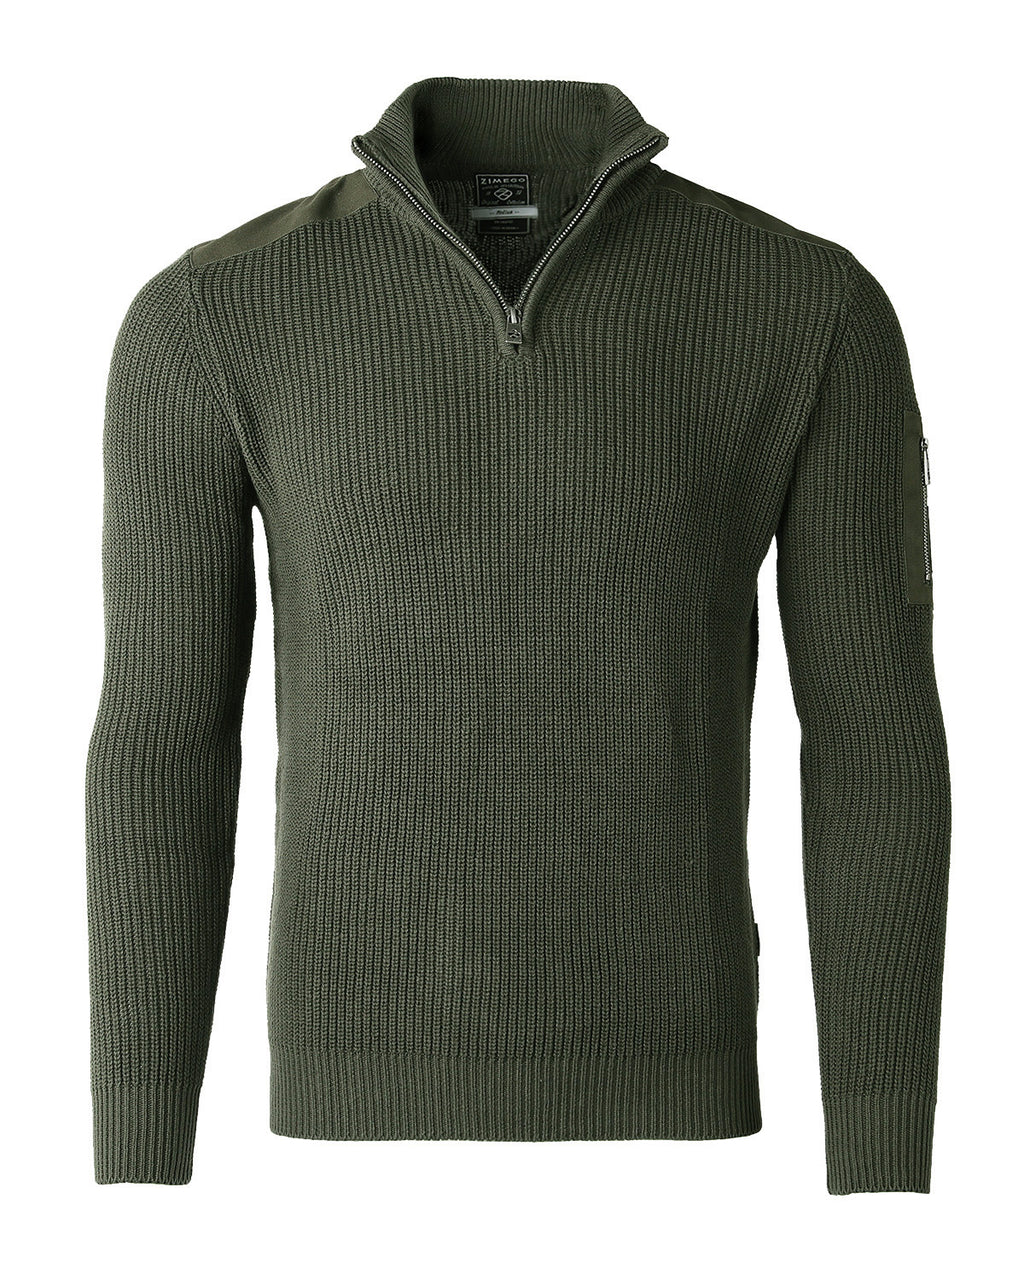 Free 3-day Shipping - ZIMEGO Mens Long Sleeve Pullover Quarter Zip Mock Neck Polo Sweater